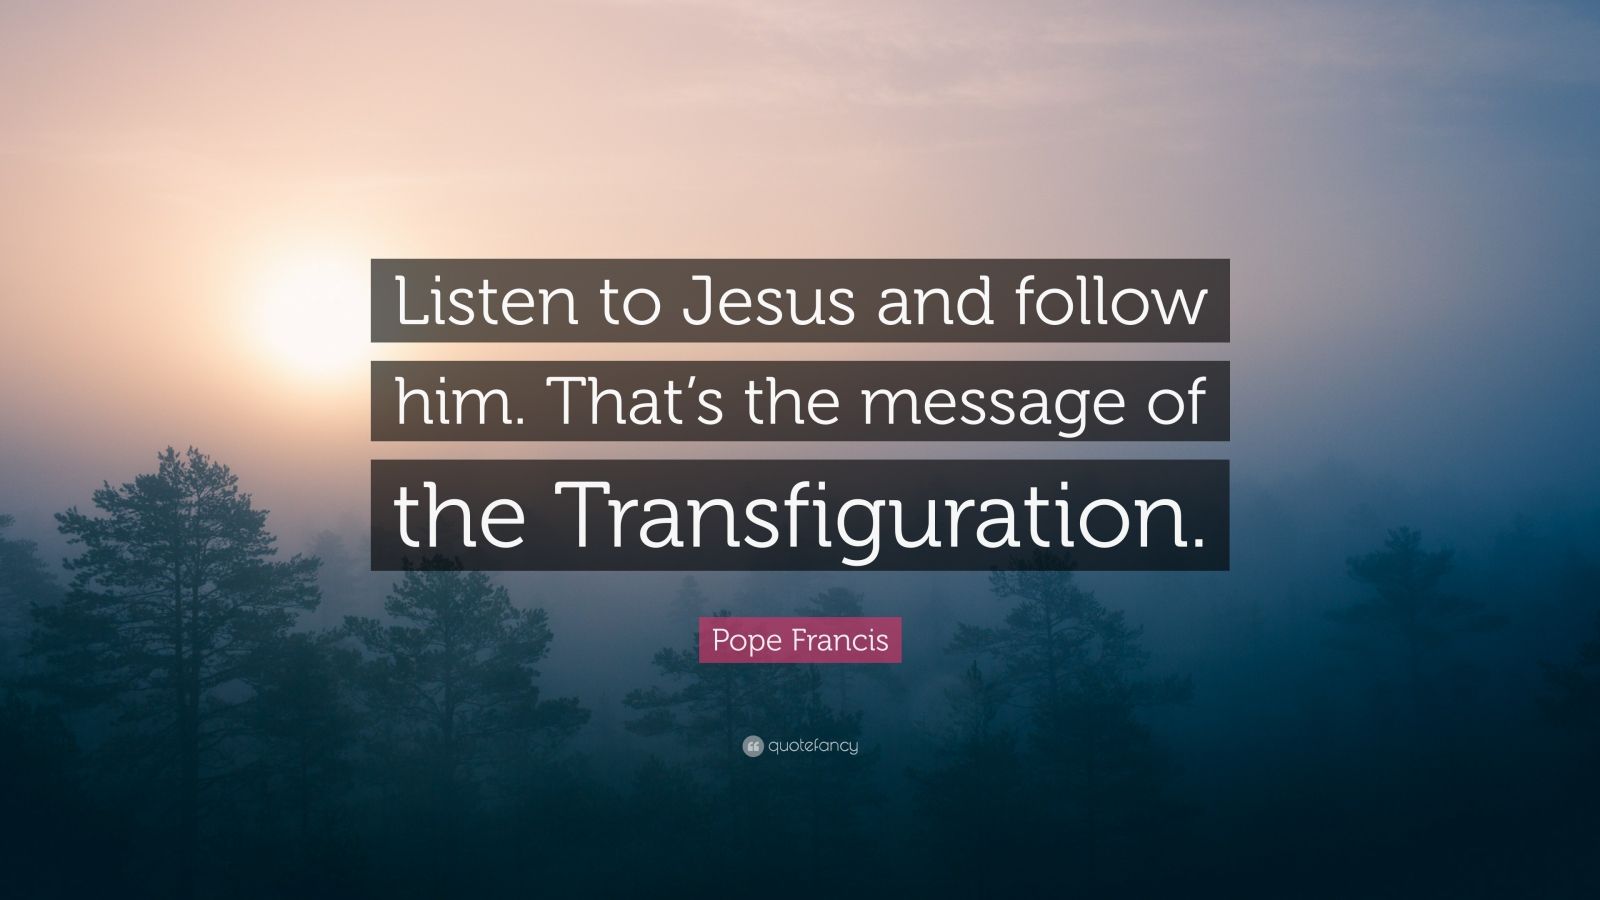 Pope Francis Quote “Listen to Jesus and follow him. That’s the message